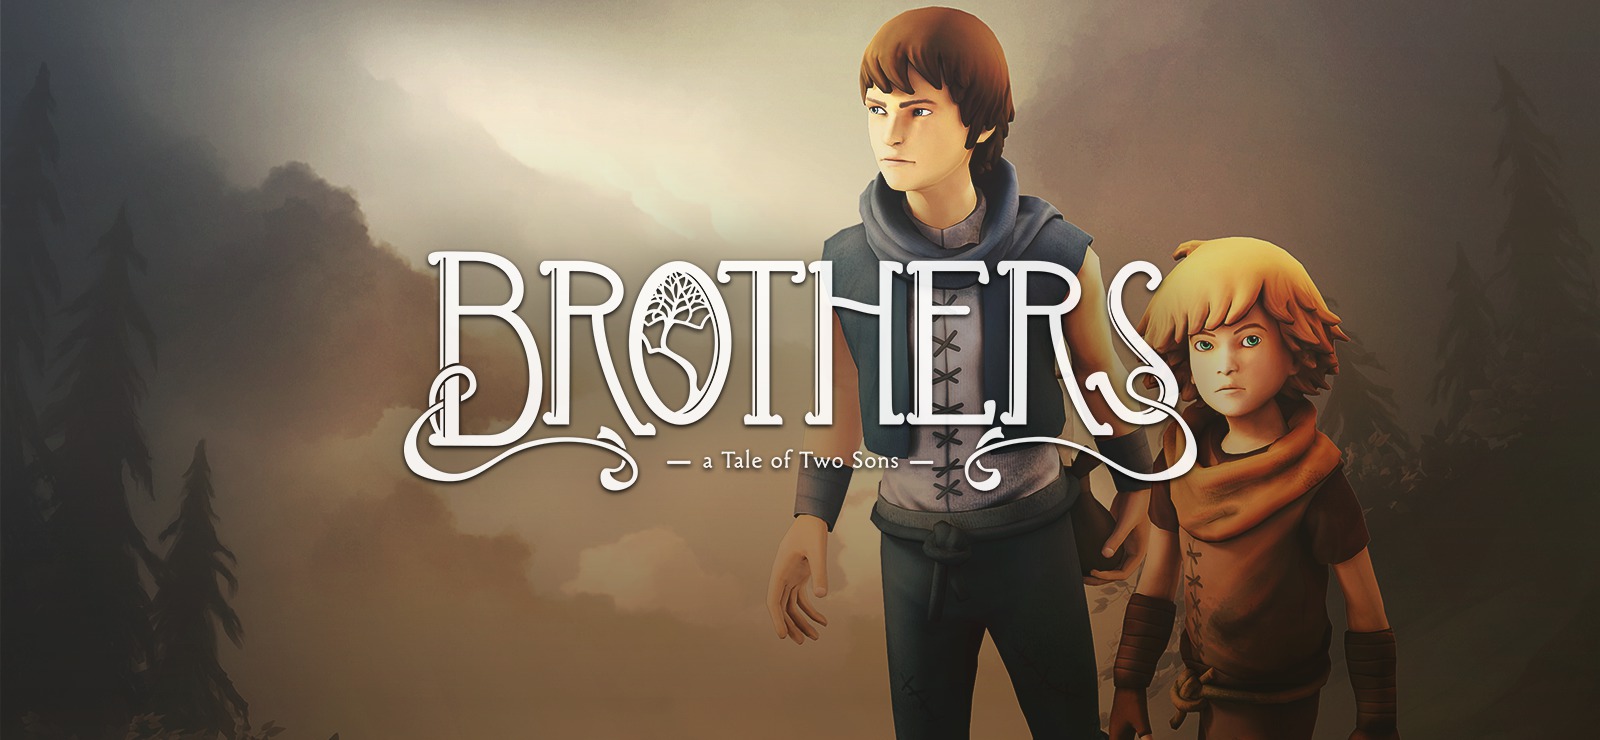 Brothers - A Tale of Two Sons #7 (финал).